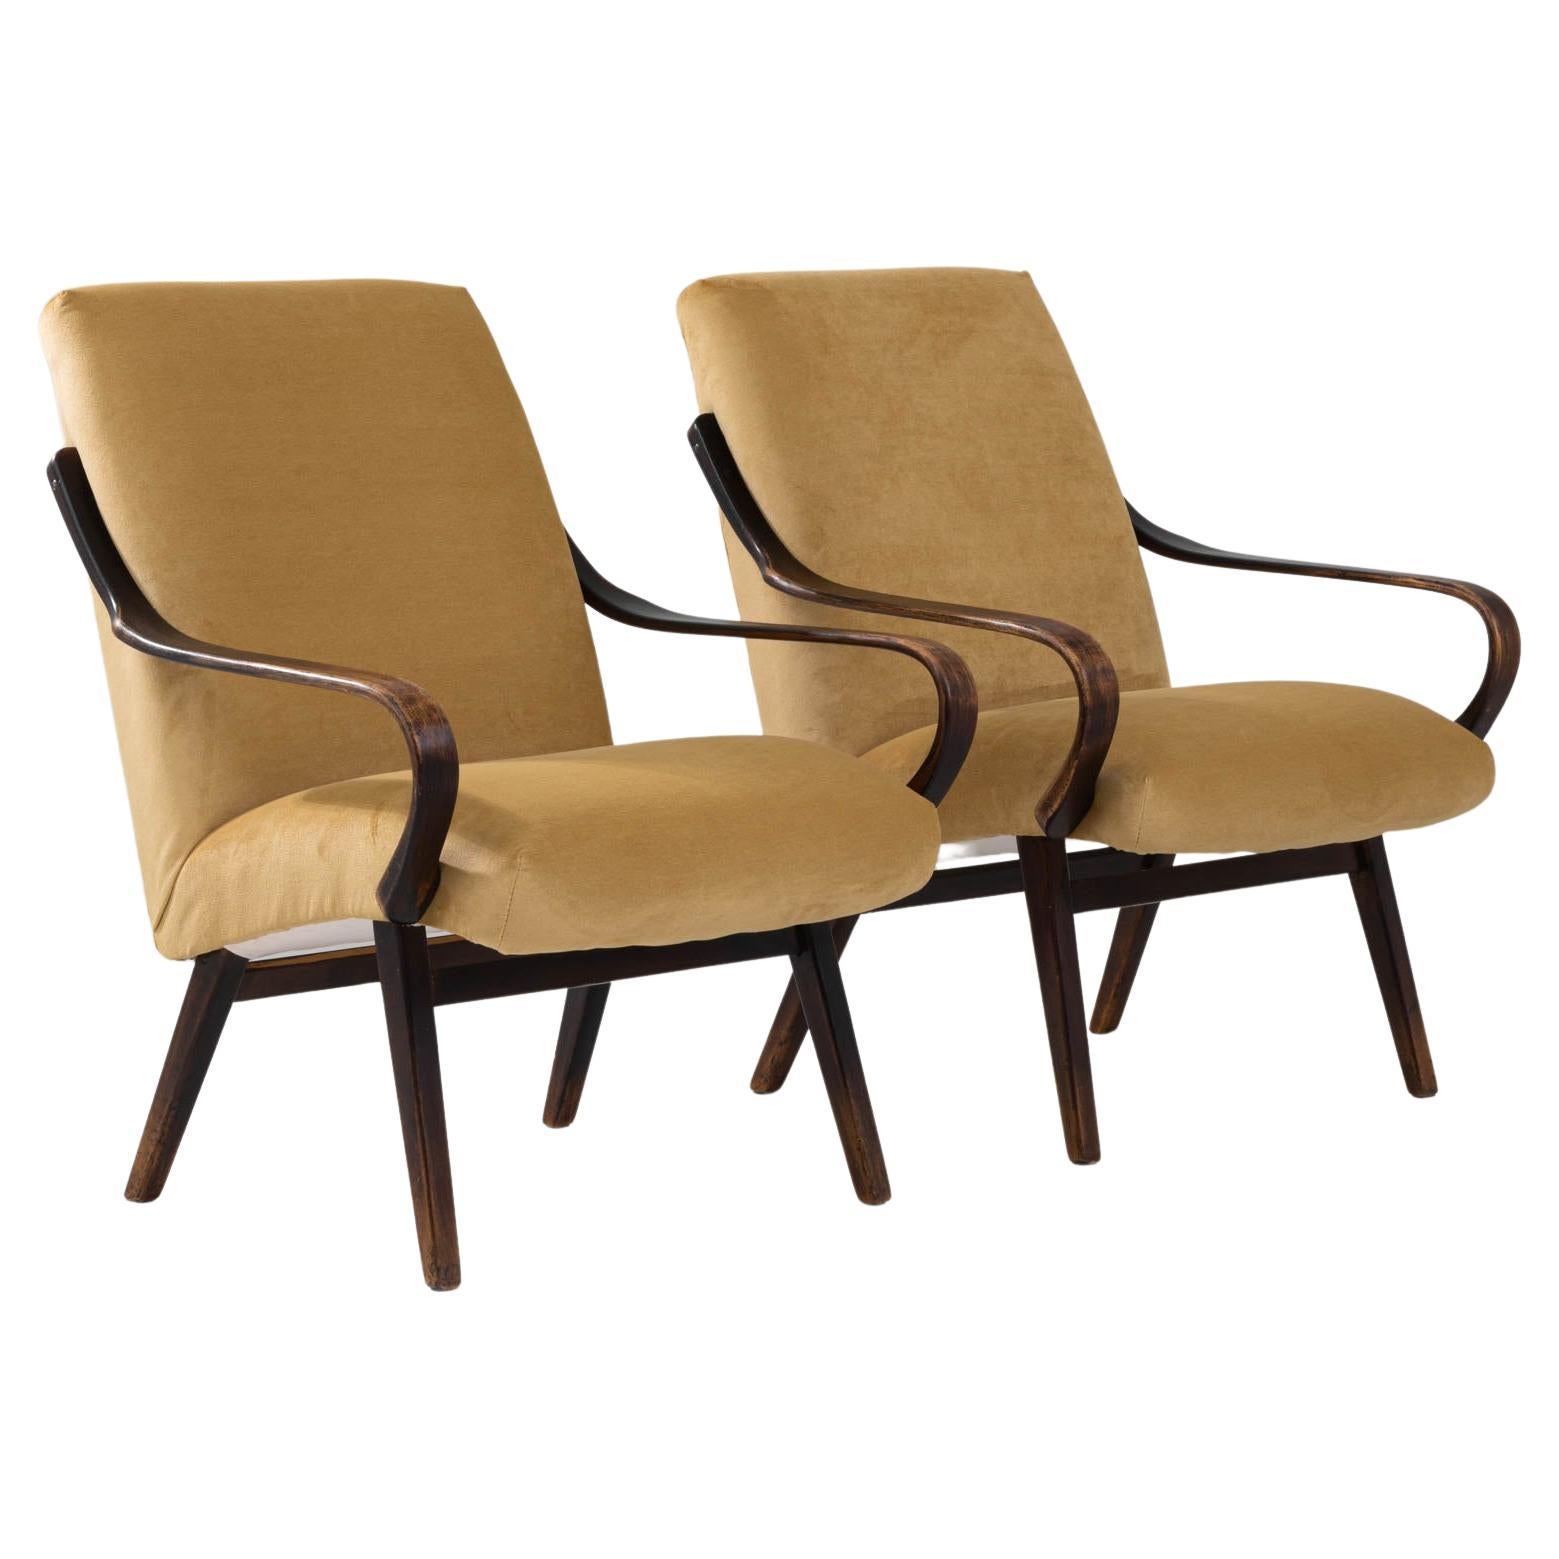 1960s Czech Upholstered Armchairs By TON, a Pair For Sale